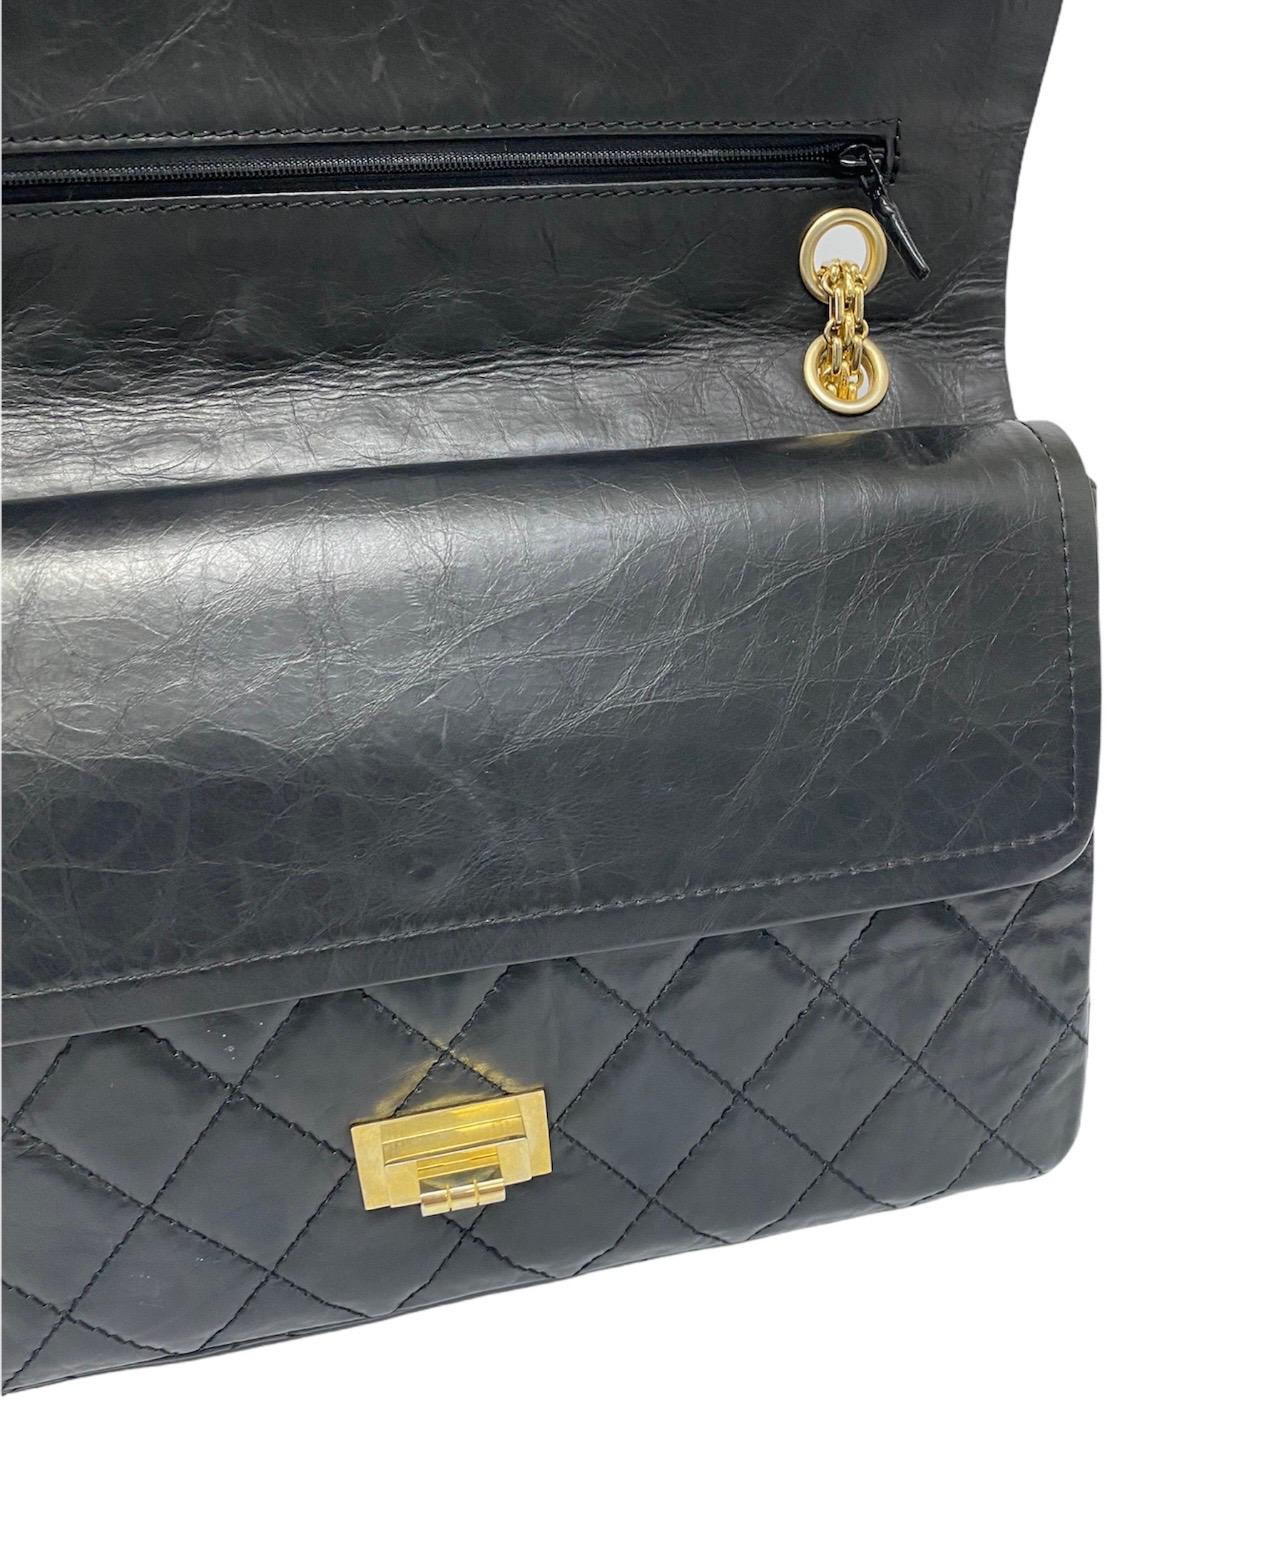 Chanel Black Leather 2.55 Limited Edition Bag 2